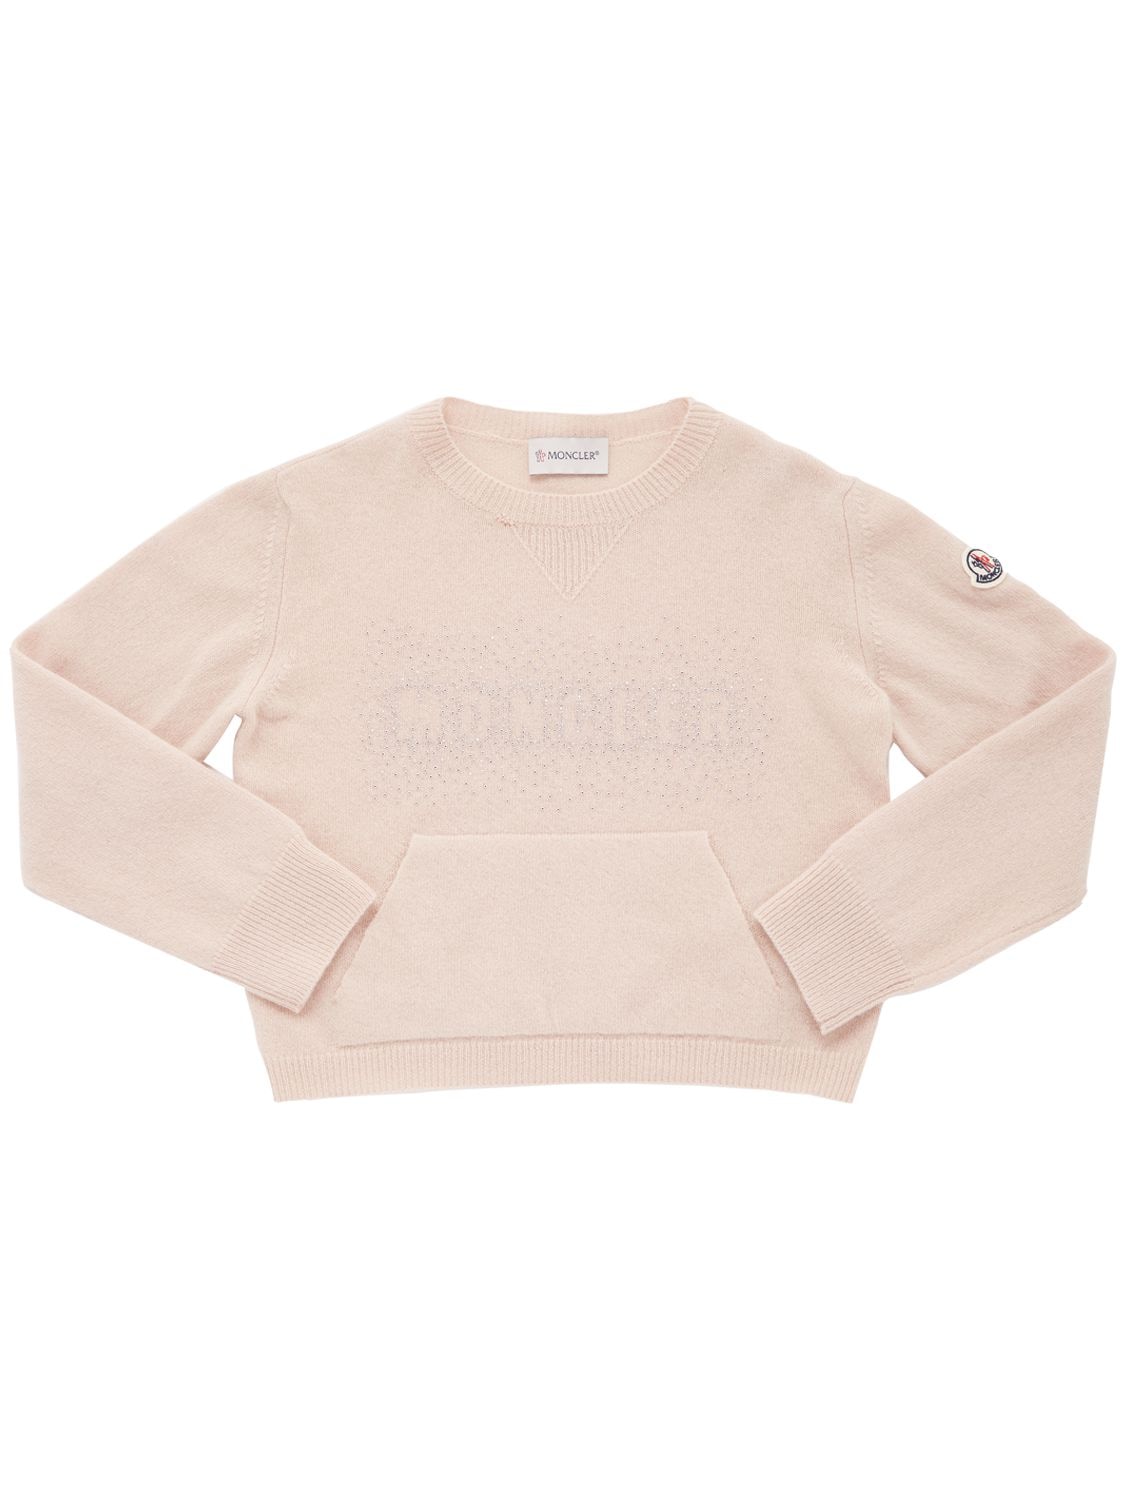 Moncler Kids' Carded Wool Sweater In Light Pink